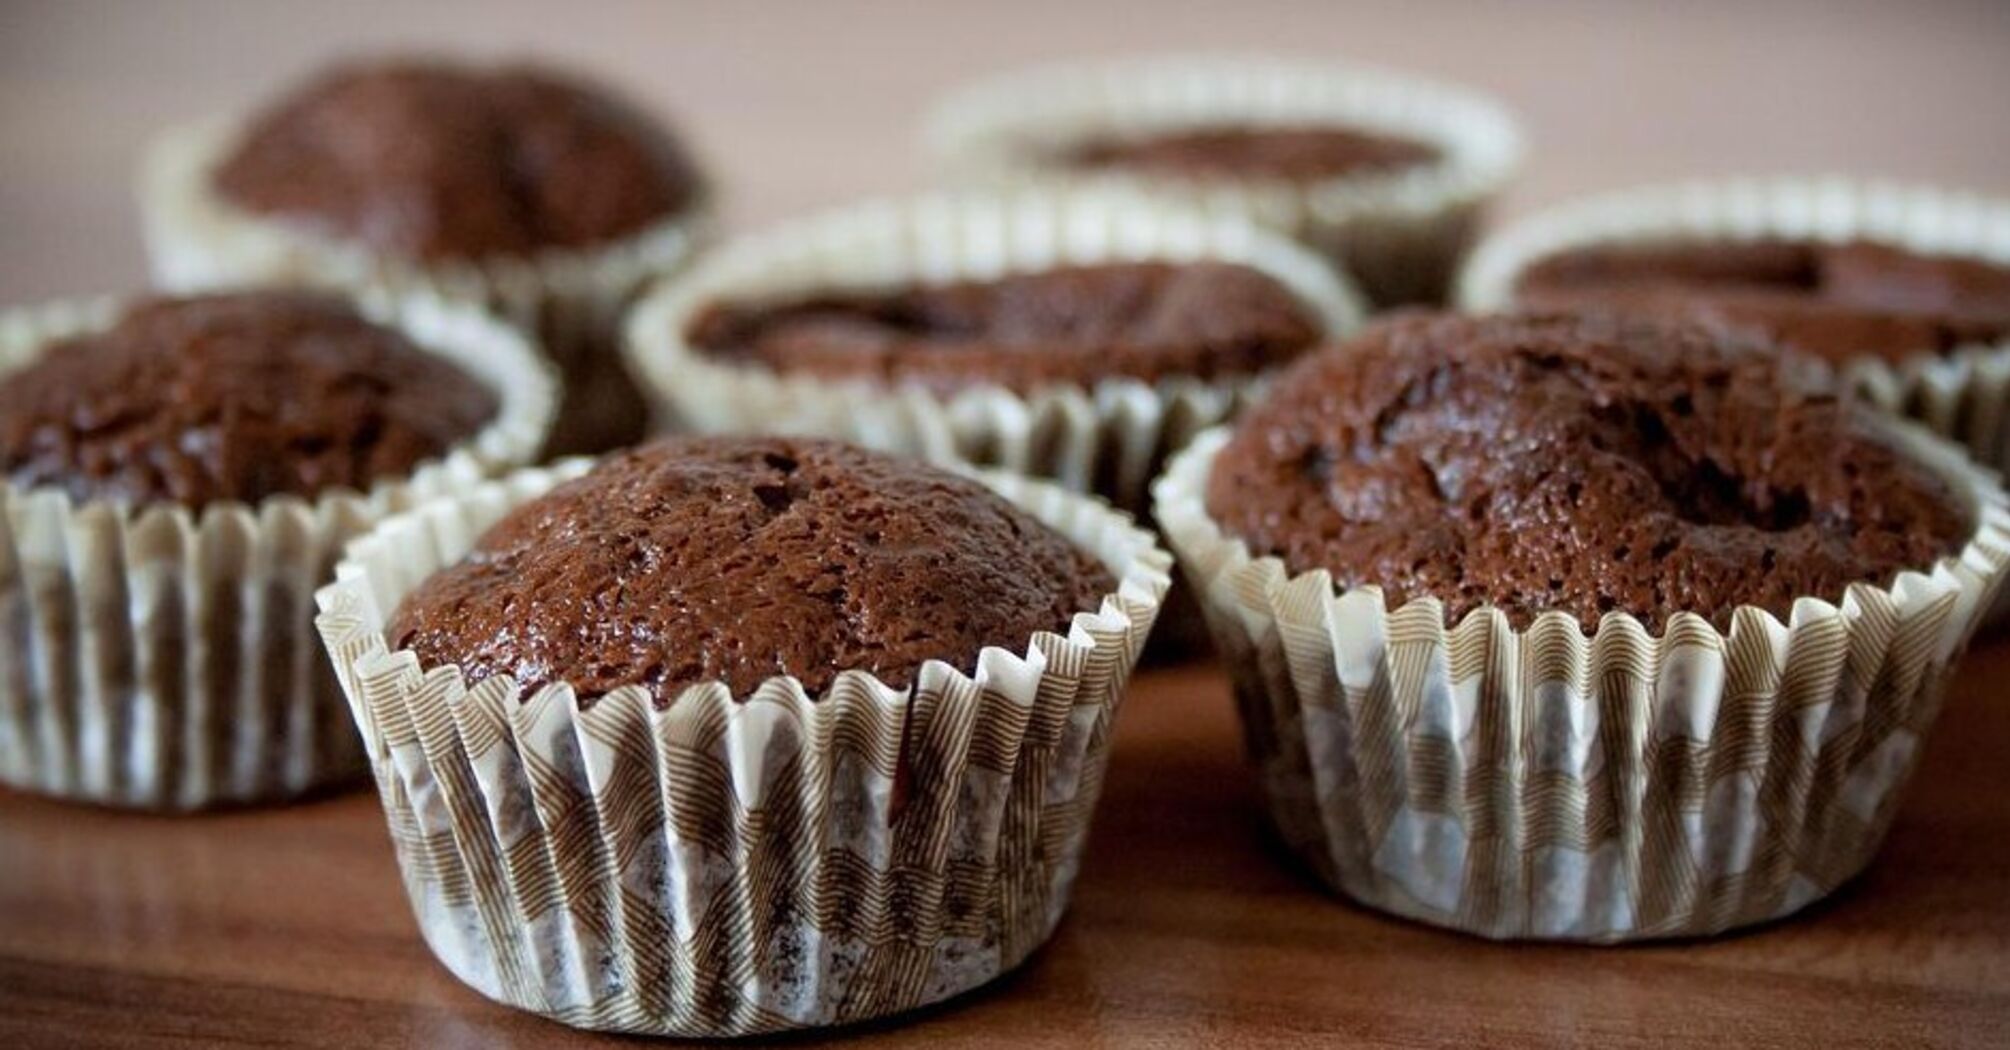 Chocolate muffins without sugar and flour: they are very fluffy